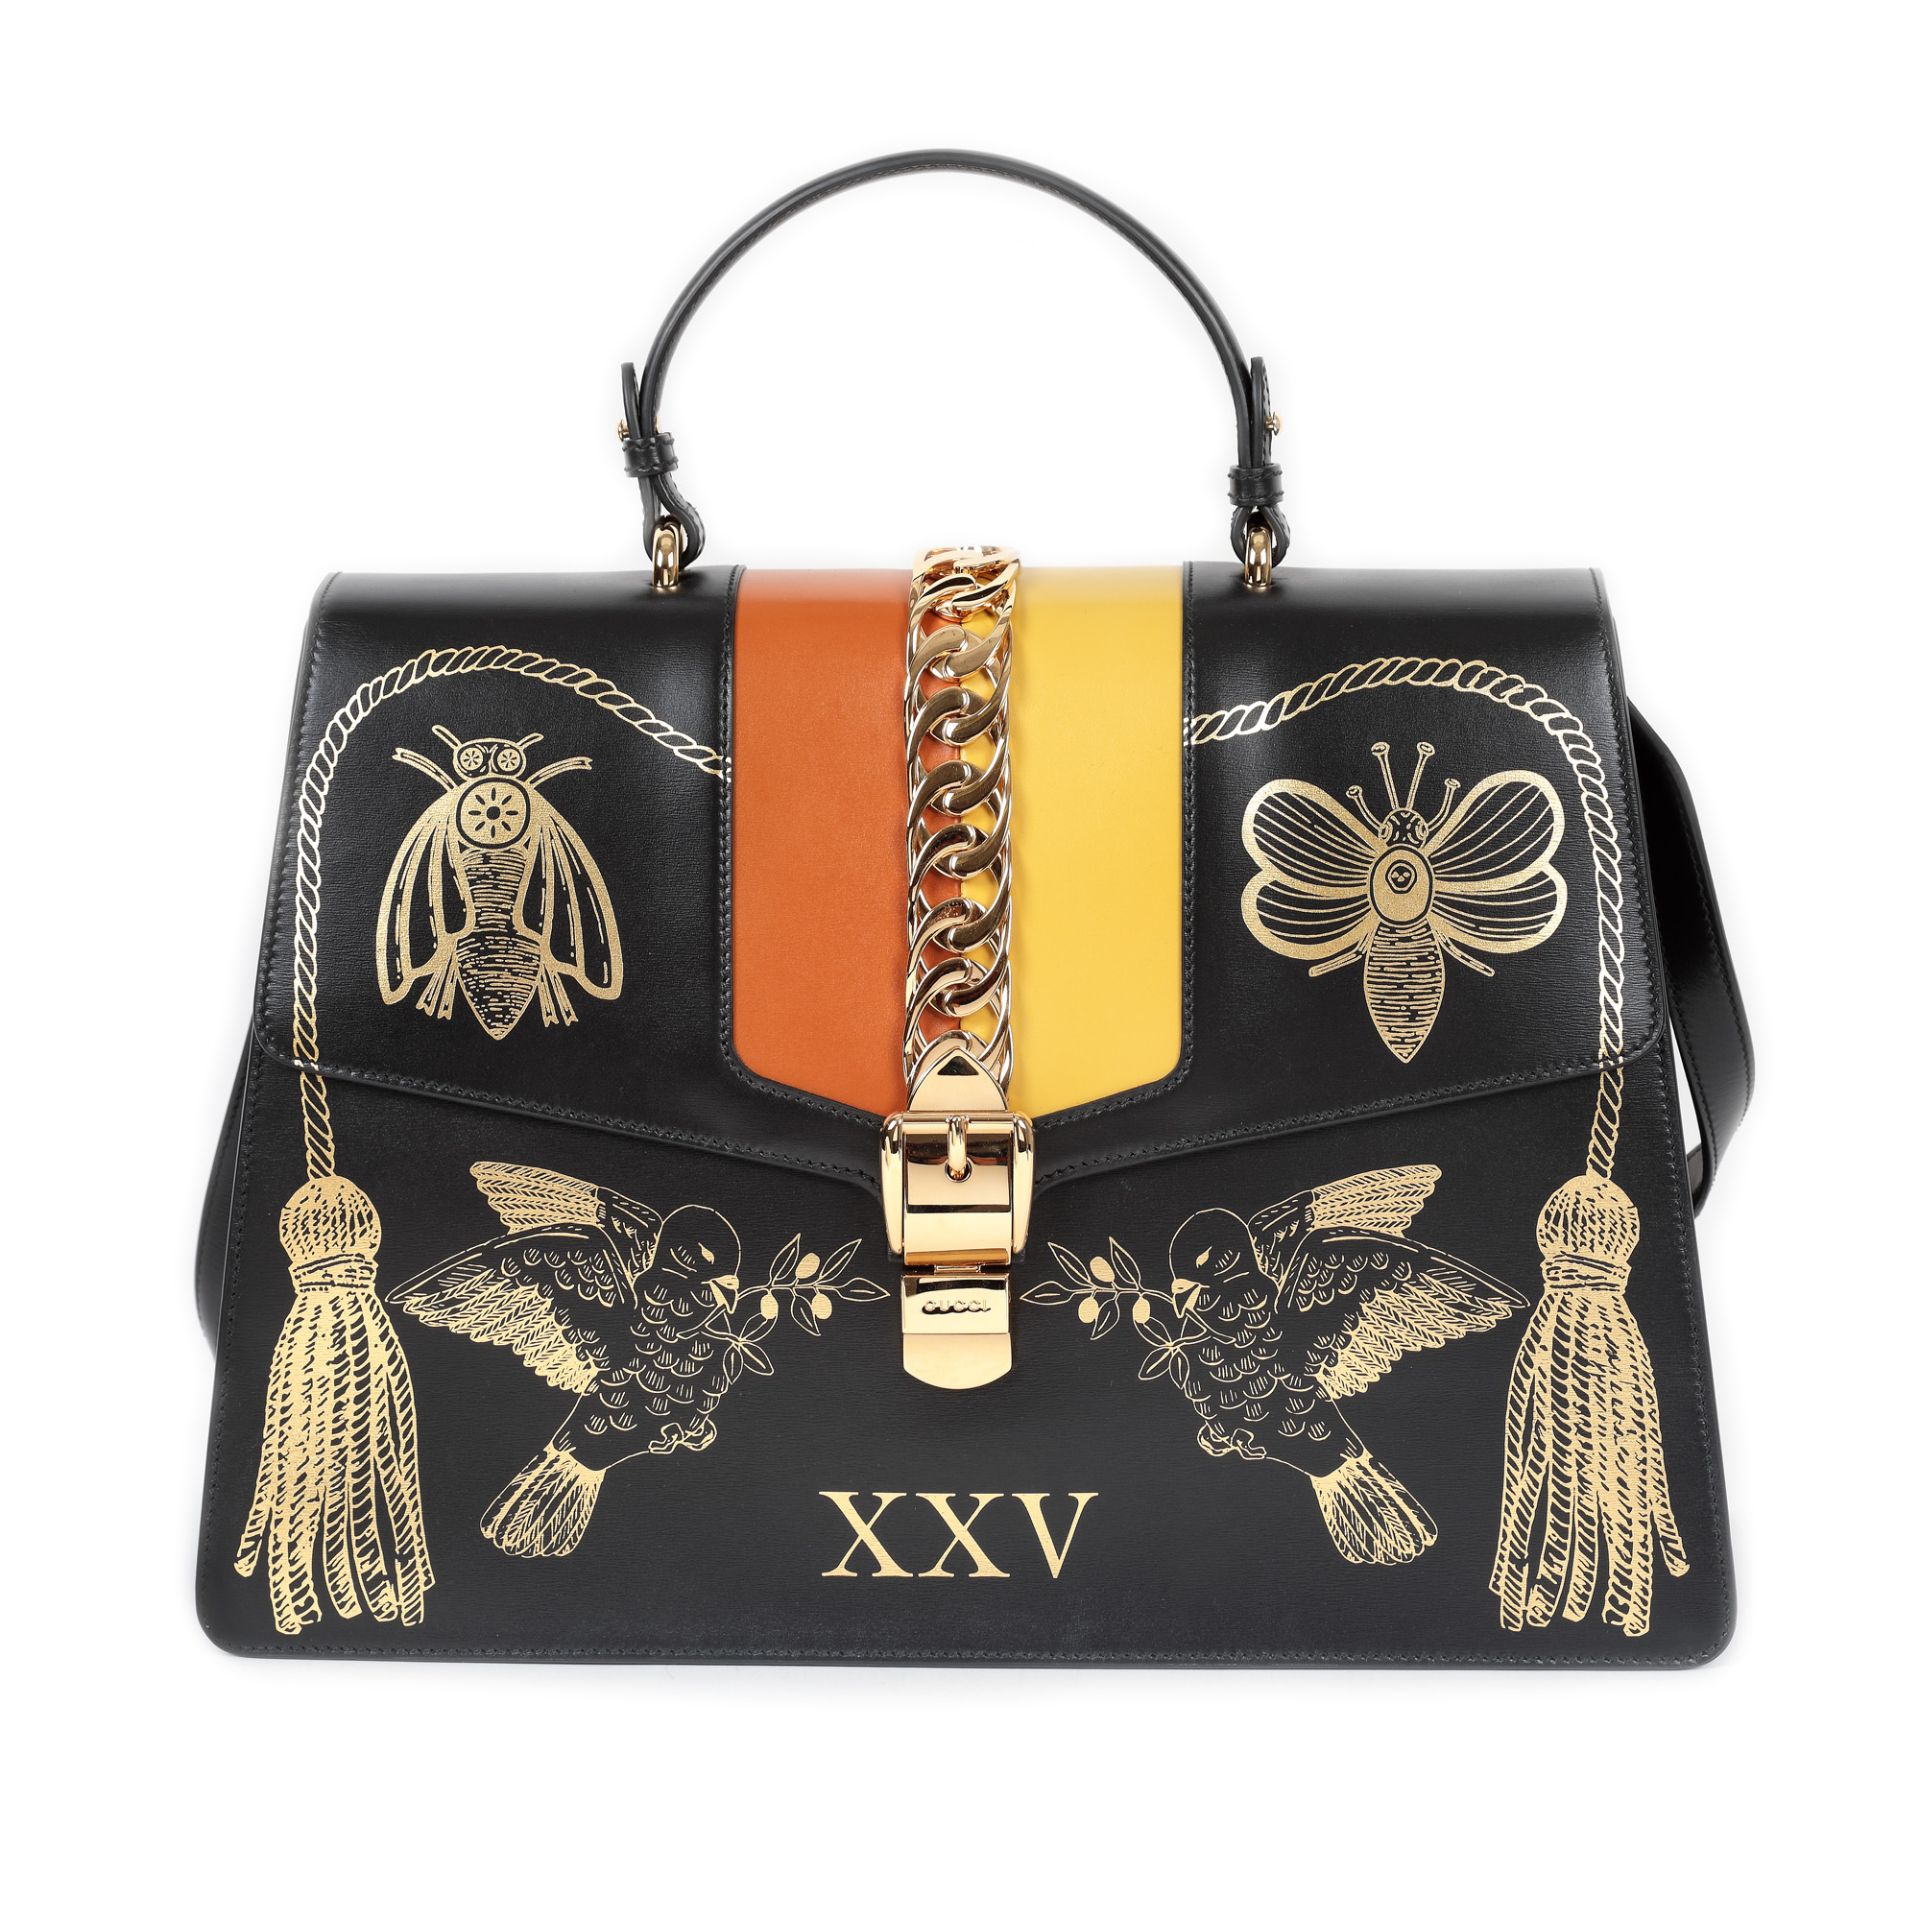 "Sylvie" - Gucci bag, leather, black, with birds and insects print